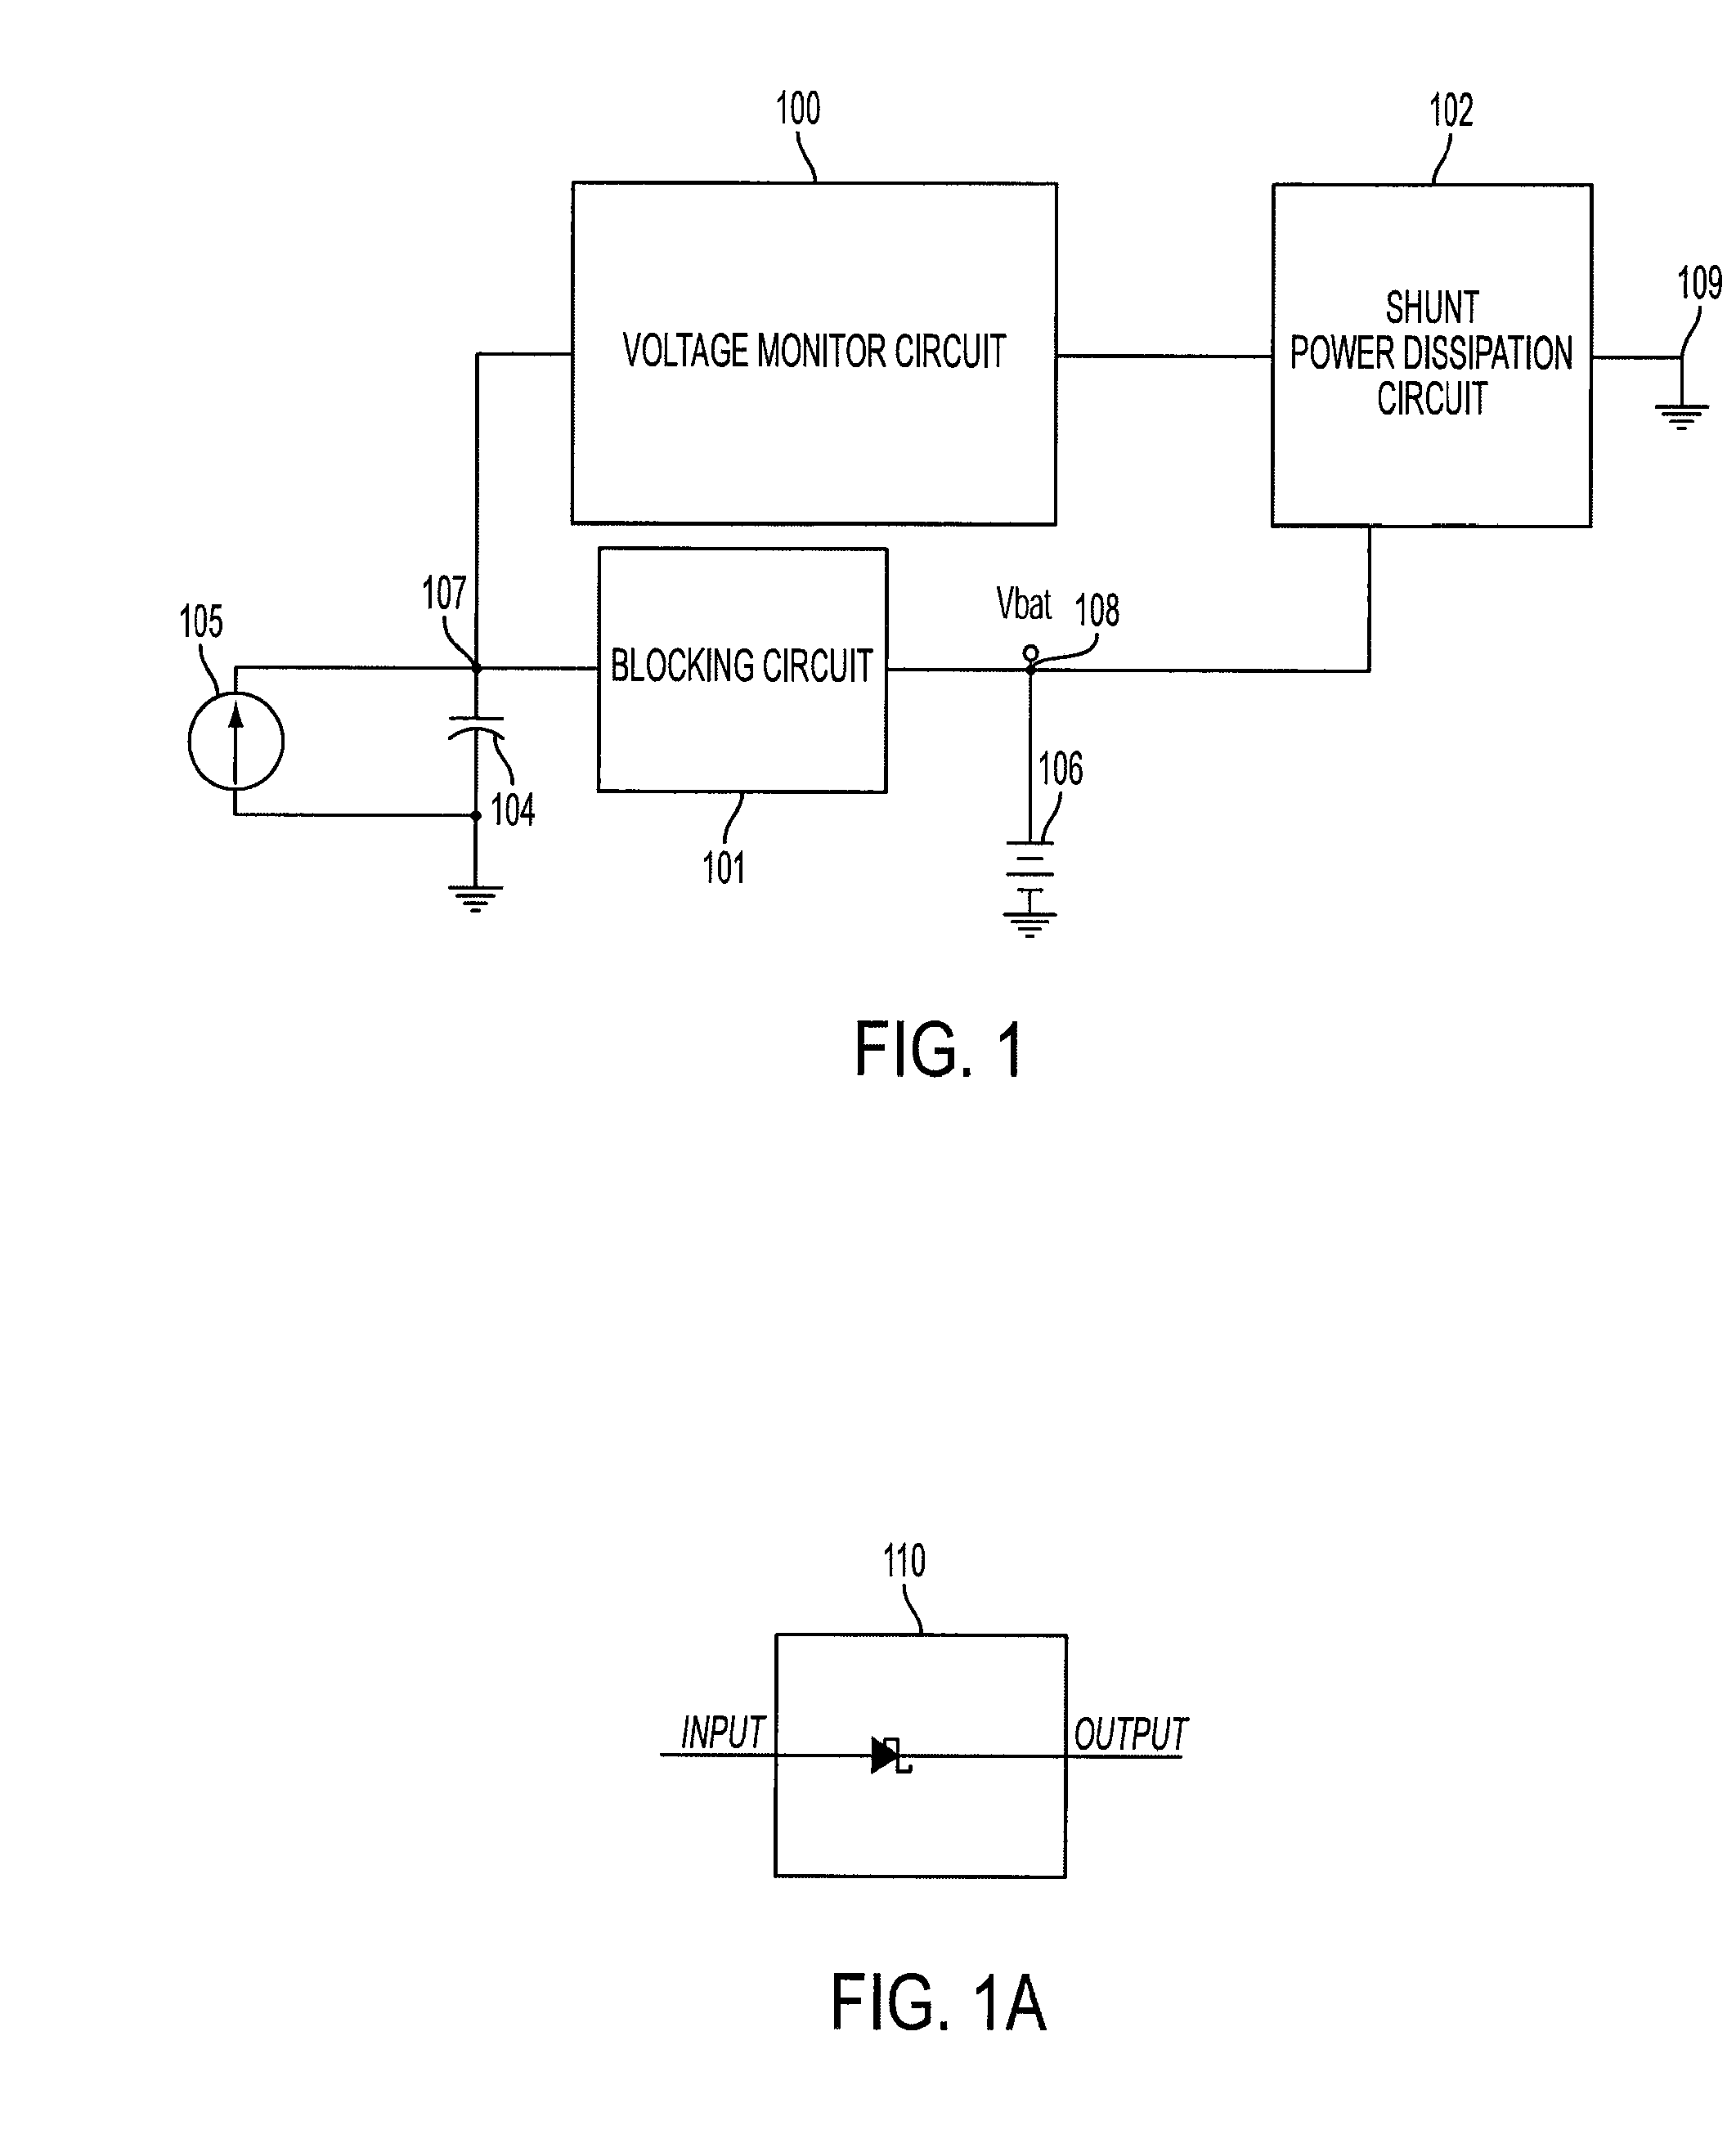 Passive over/under voltage control and protection for energy storage devices associated with energy harvesting